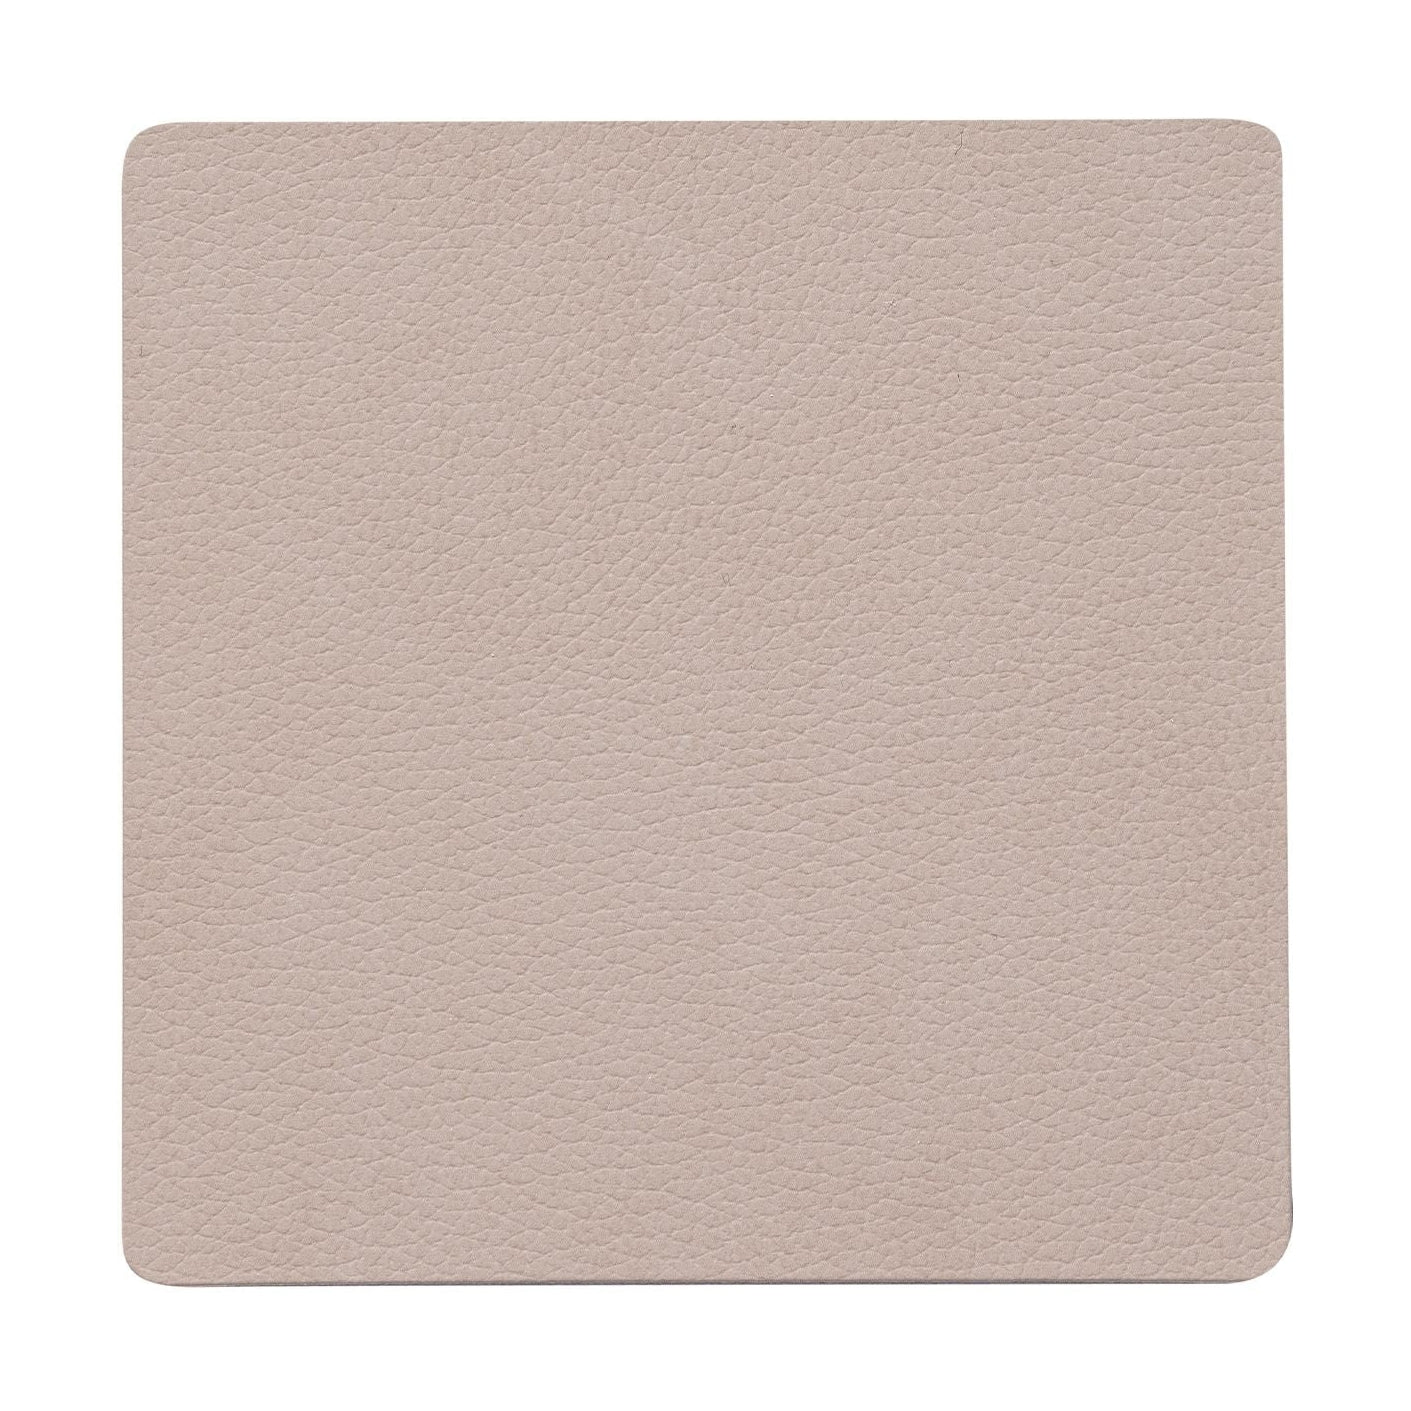 Lind DNA Glas Mat Square, Clay Brown